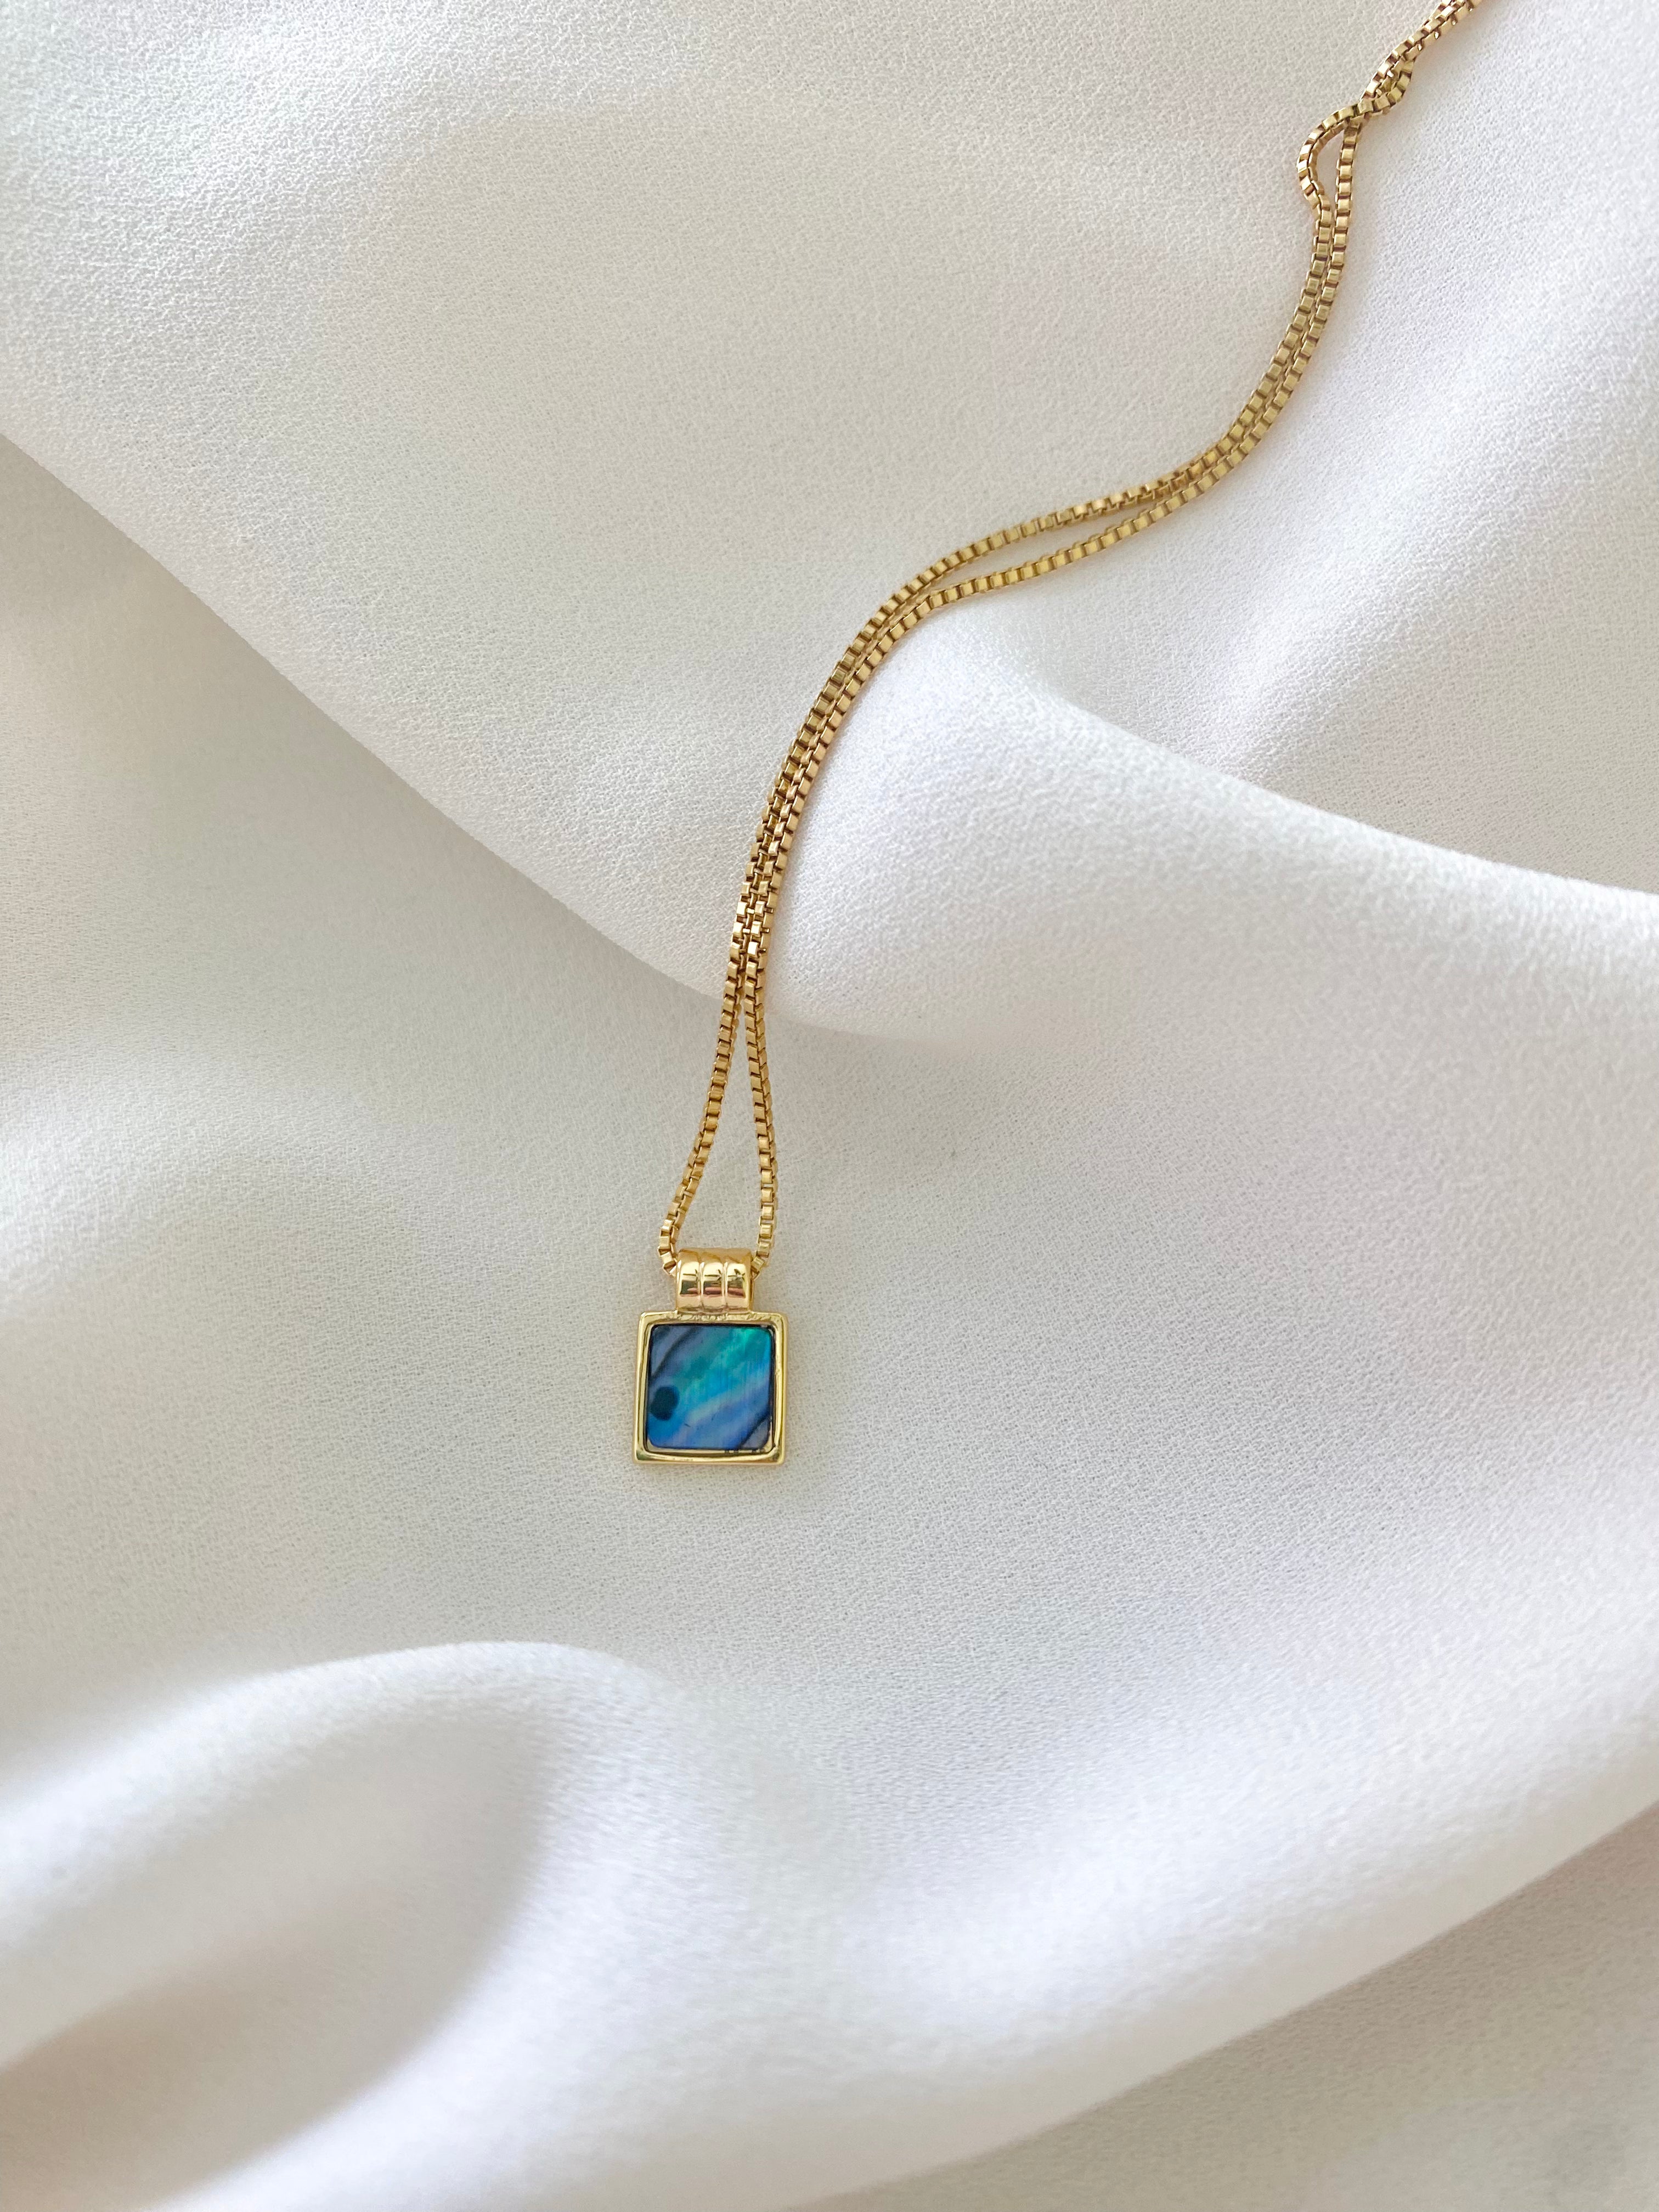 Dainty Square Shaped Abalone Pendant Necklace - Gold Filled - Beachy Jewelry